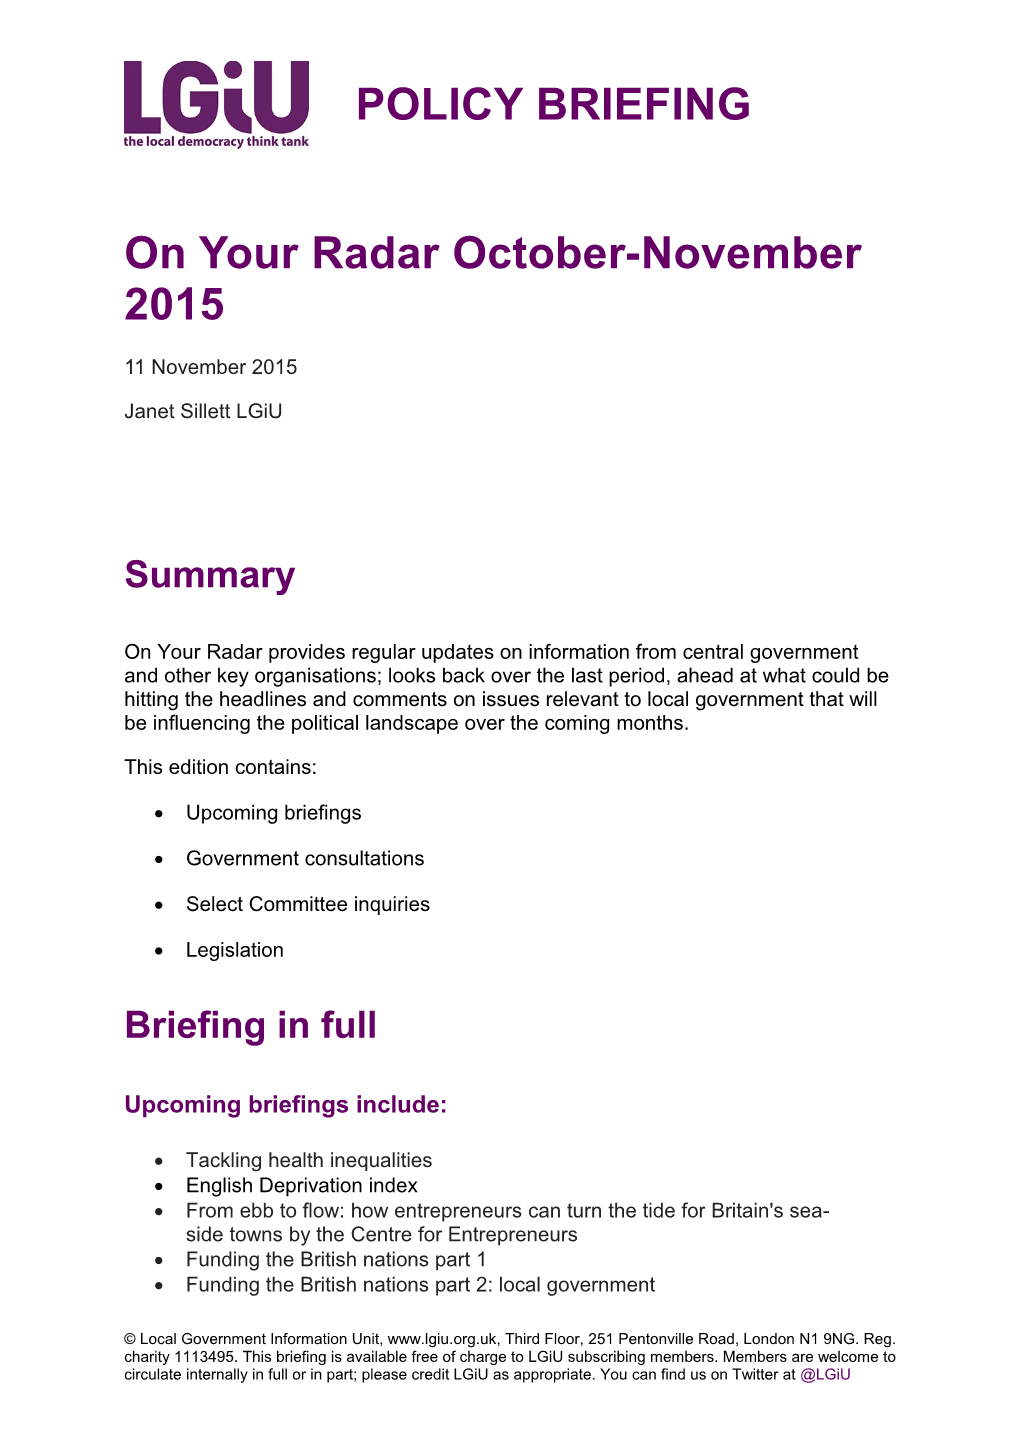 On Your Radar Provides Regular Updates on Information from Central Government and Other